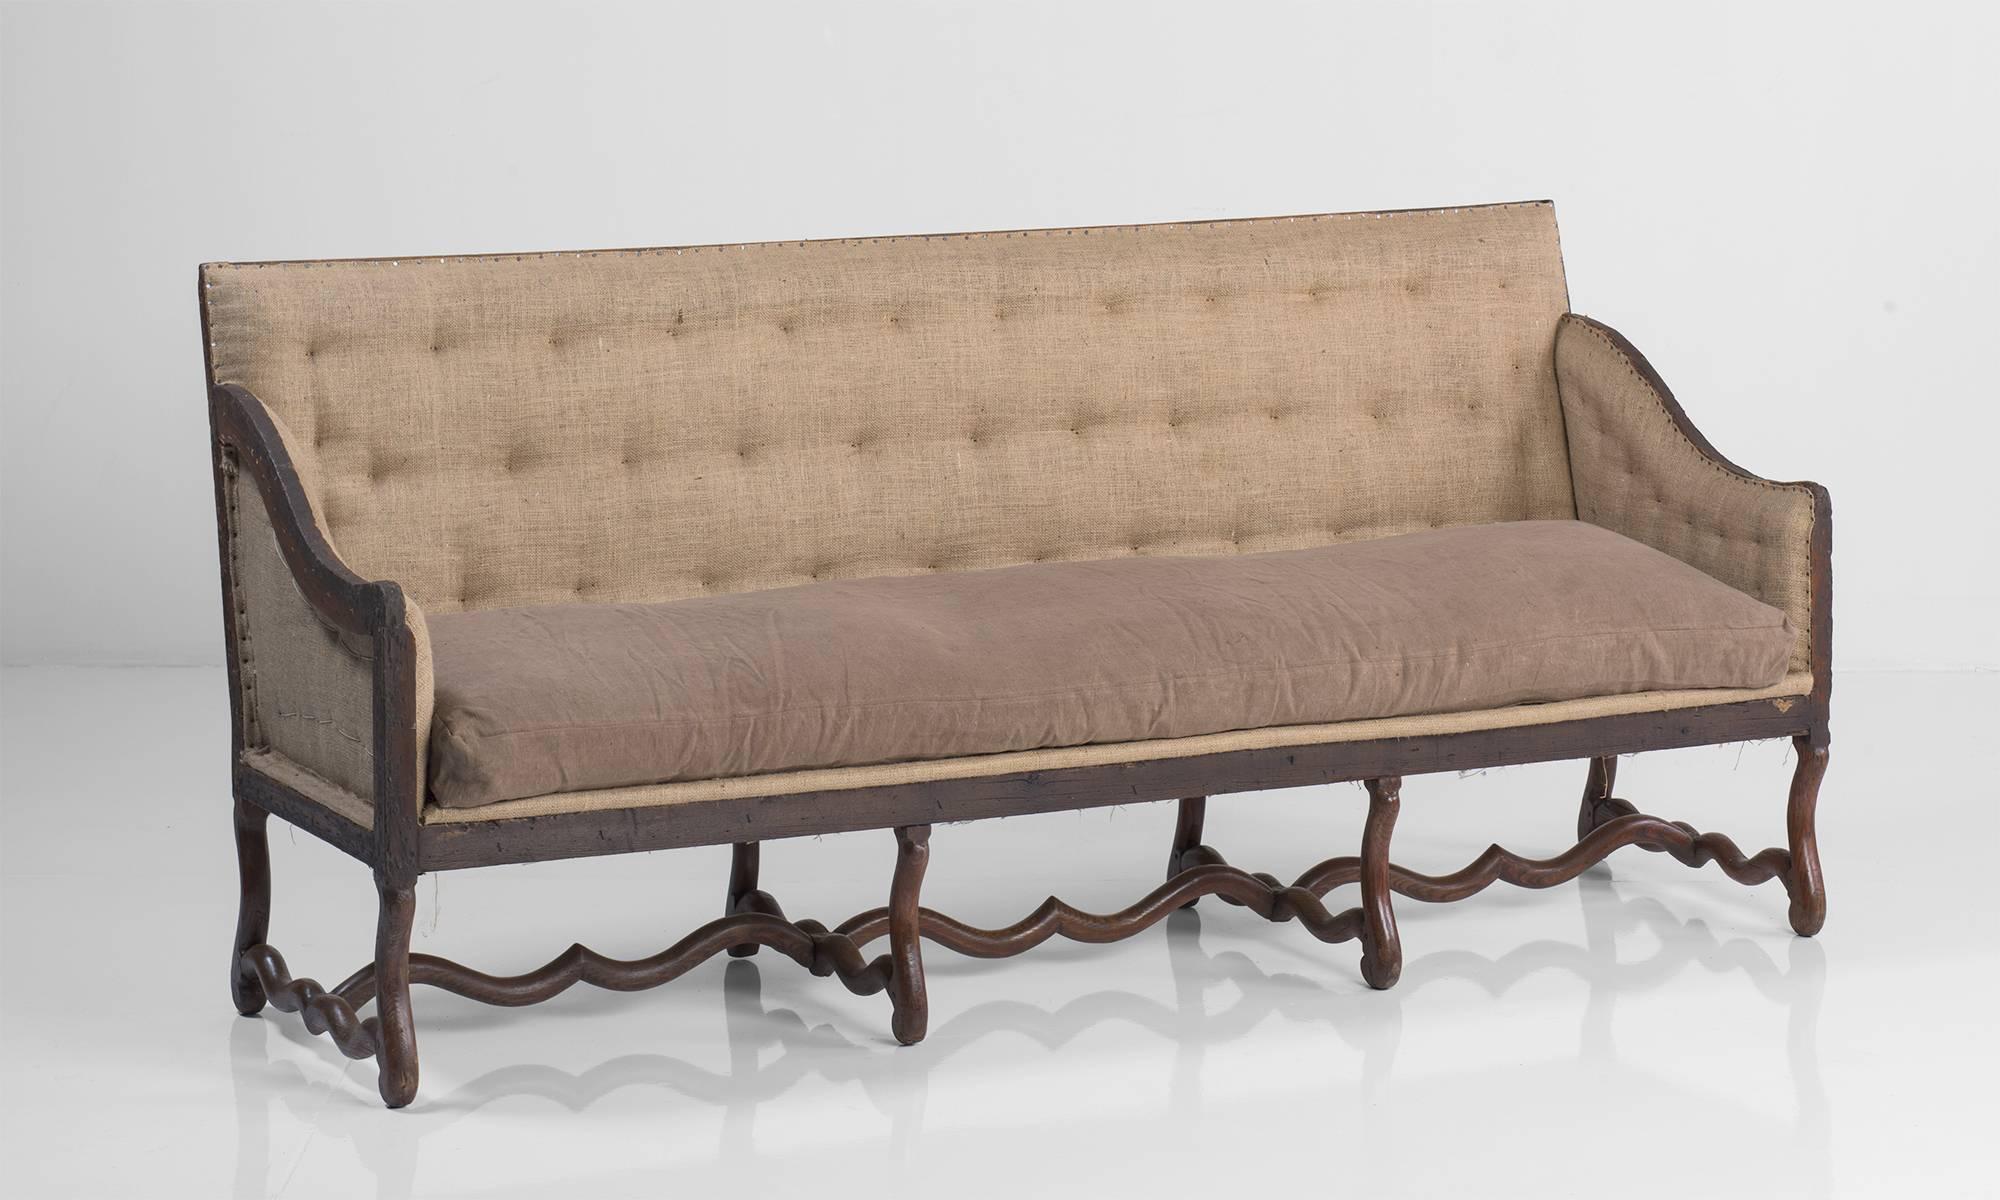 Os de Mouton sofa, made in France, circa 1790.

Deconstructed with filled seat cushion in antique French linen.